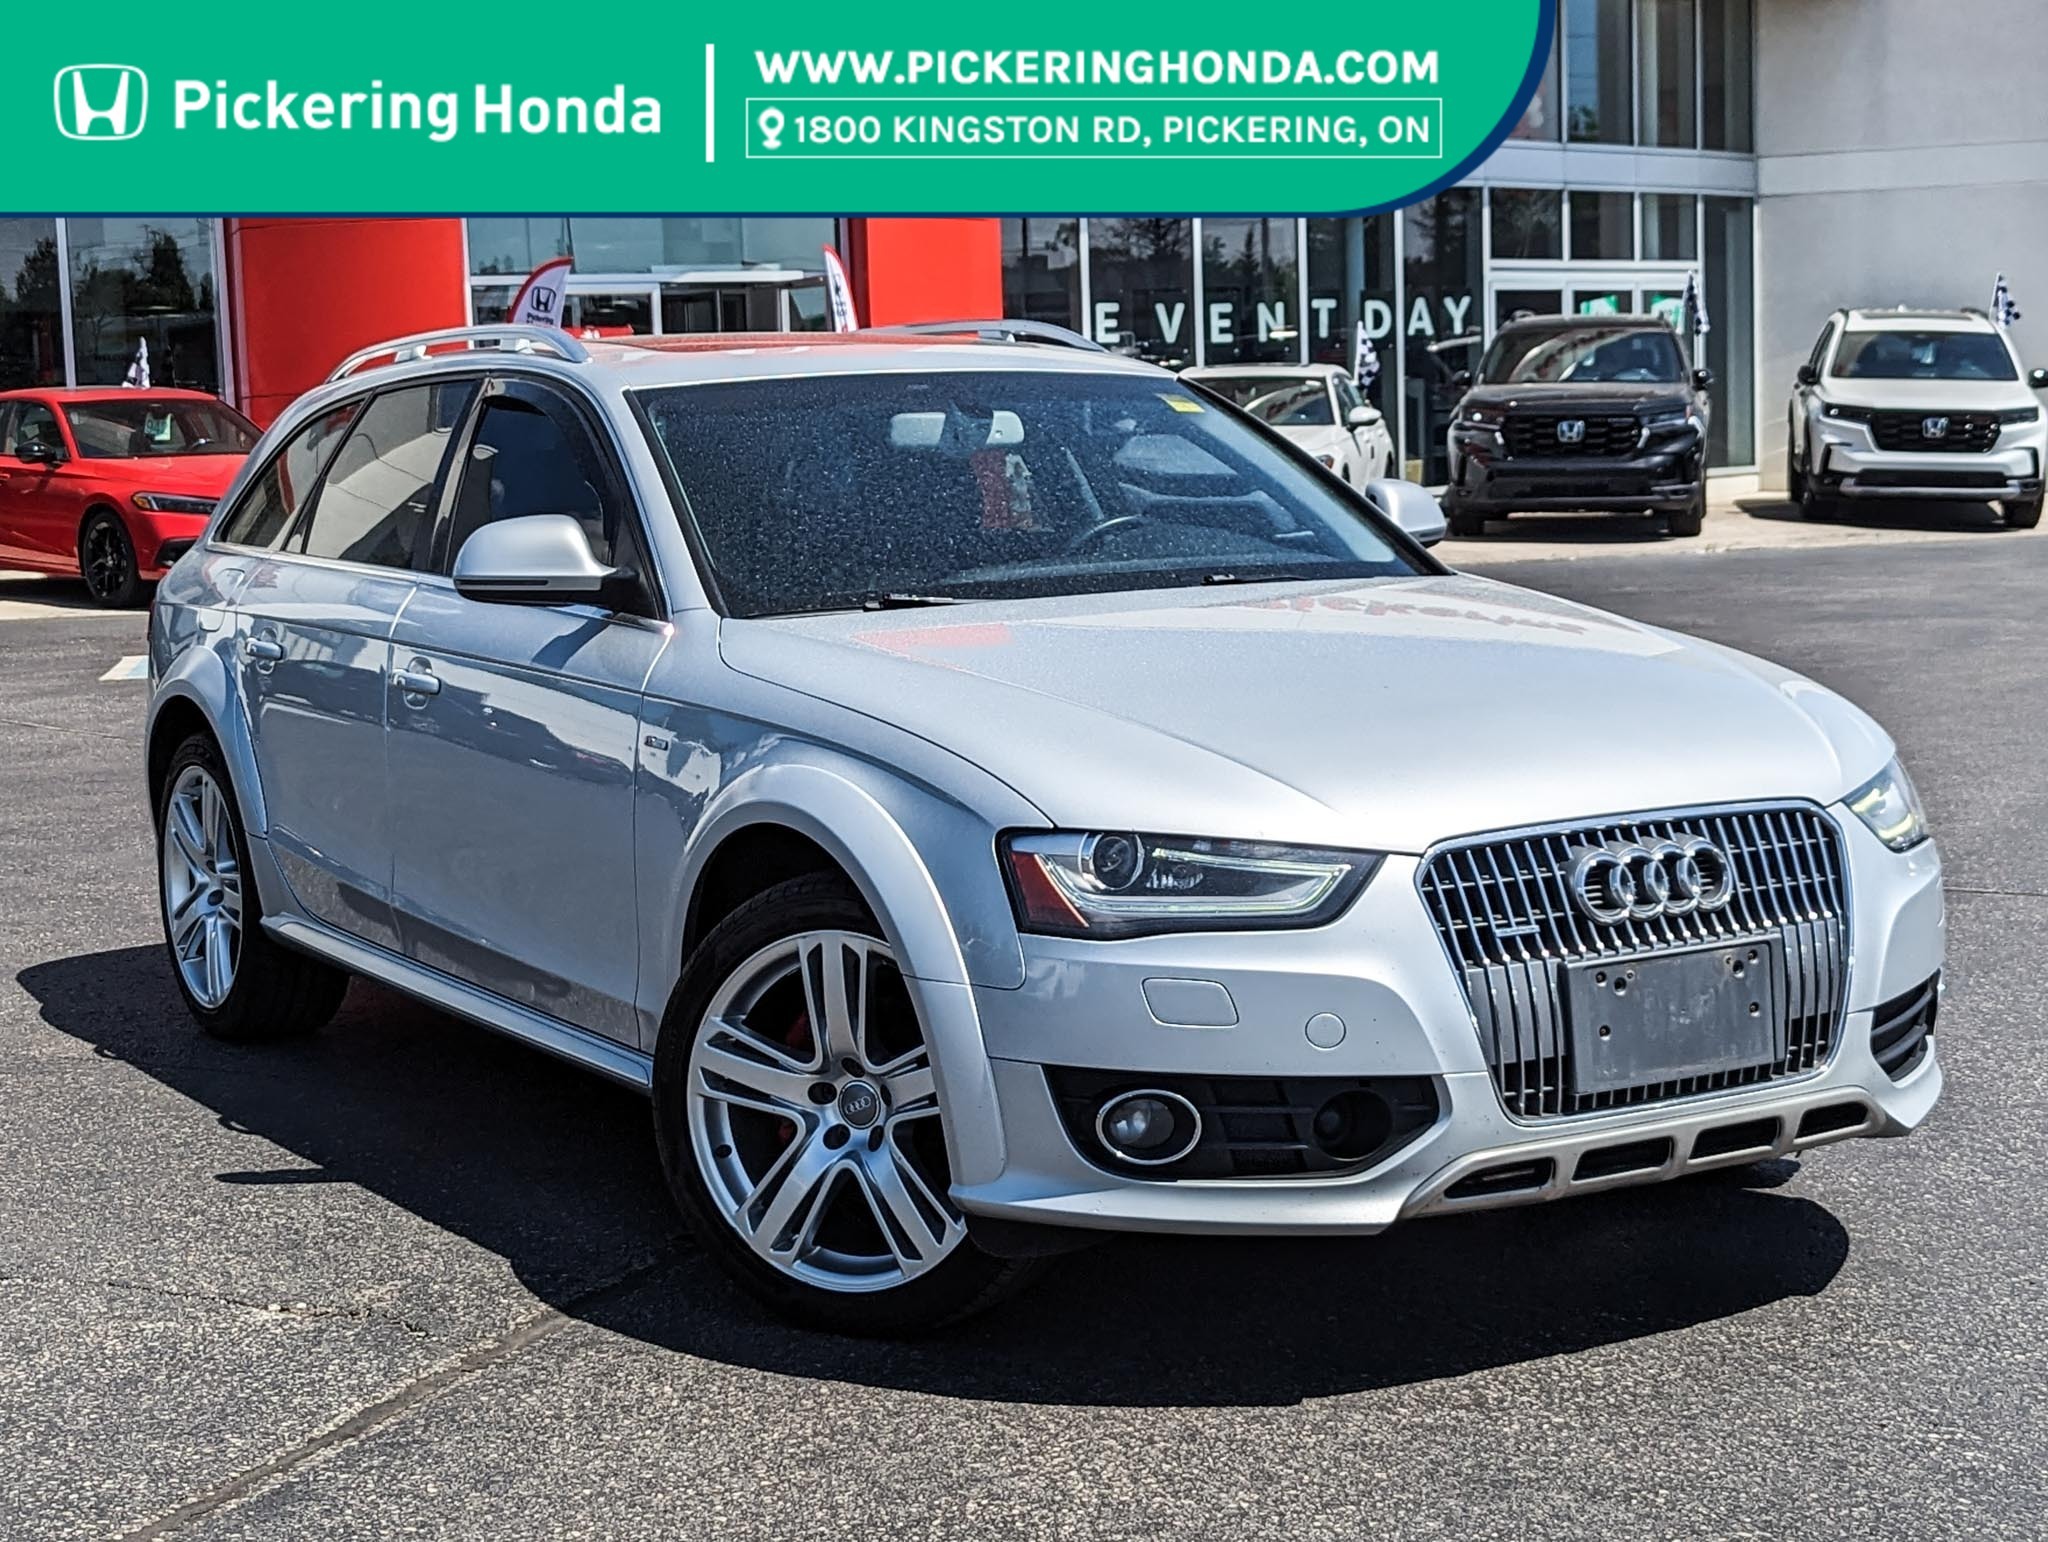 2014 Audi A4 allroad 2.0 Technik|Leather|Sunroof|Navi|SOLD AS-IS